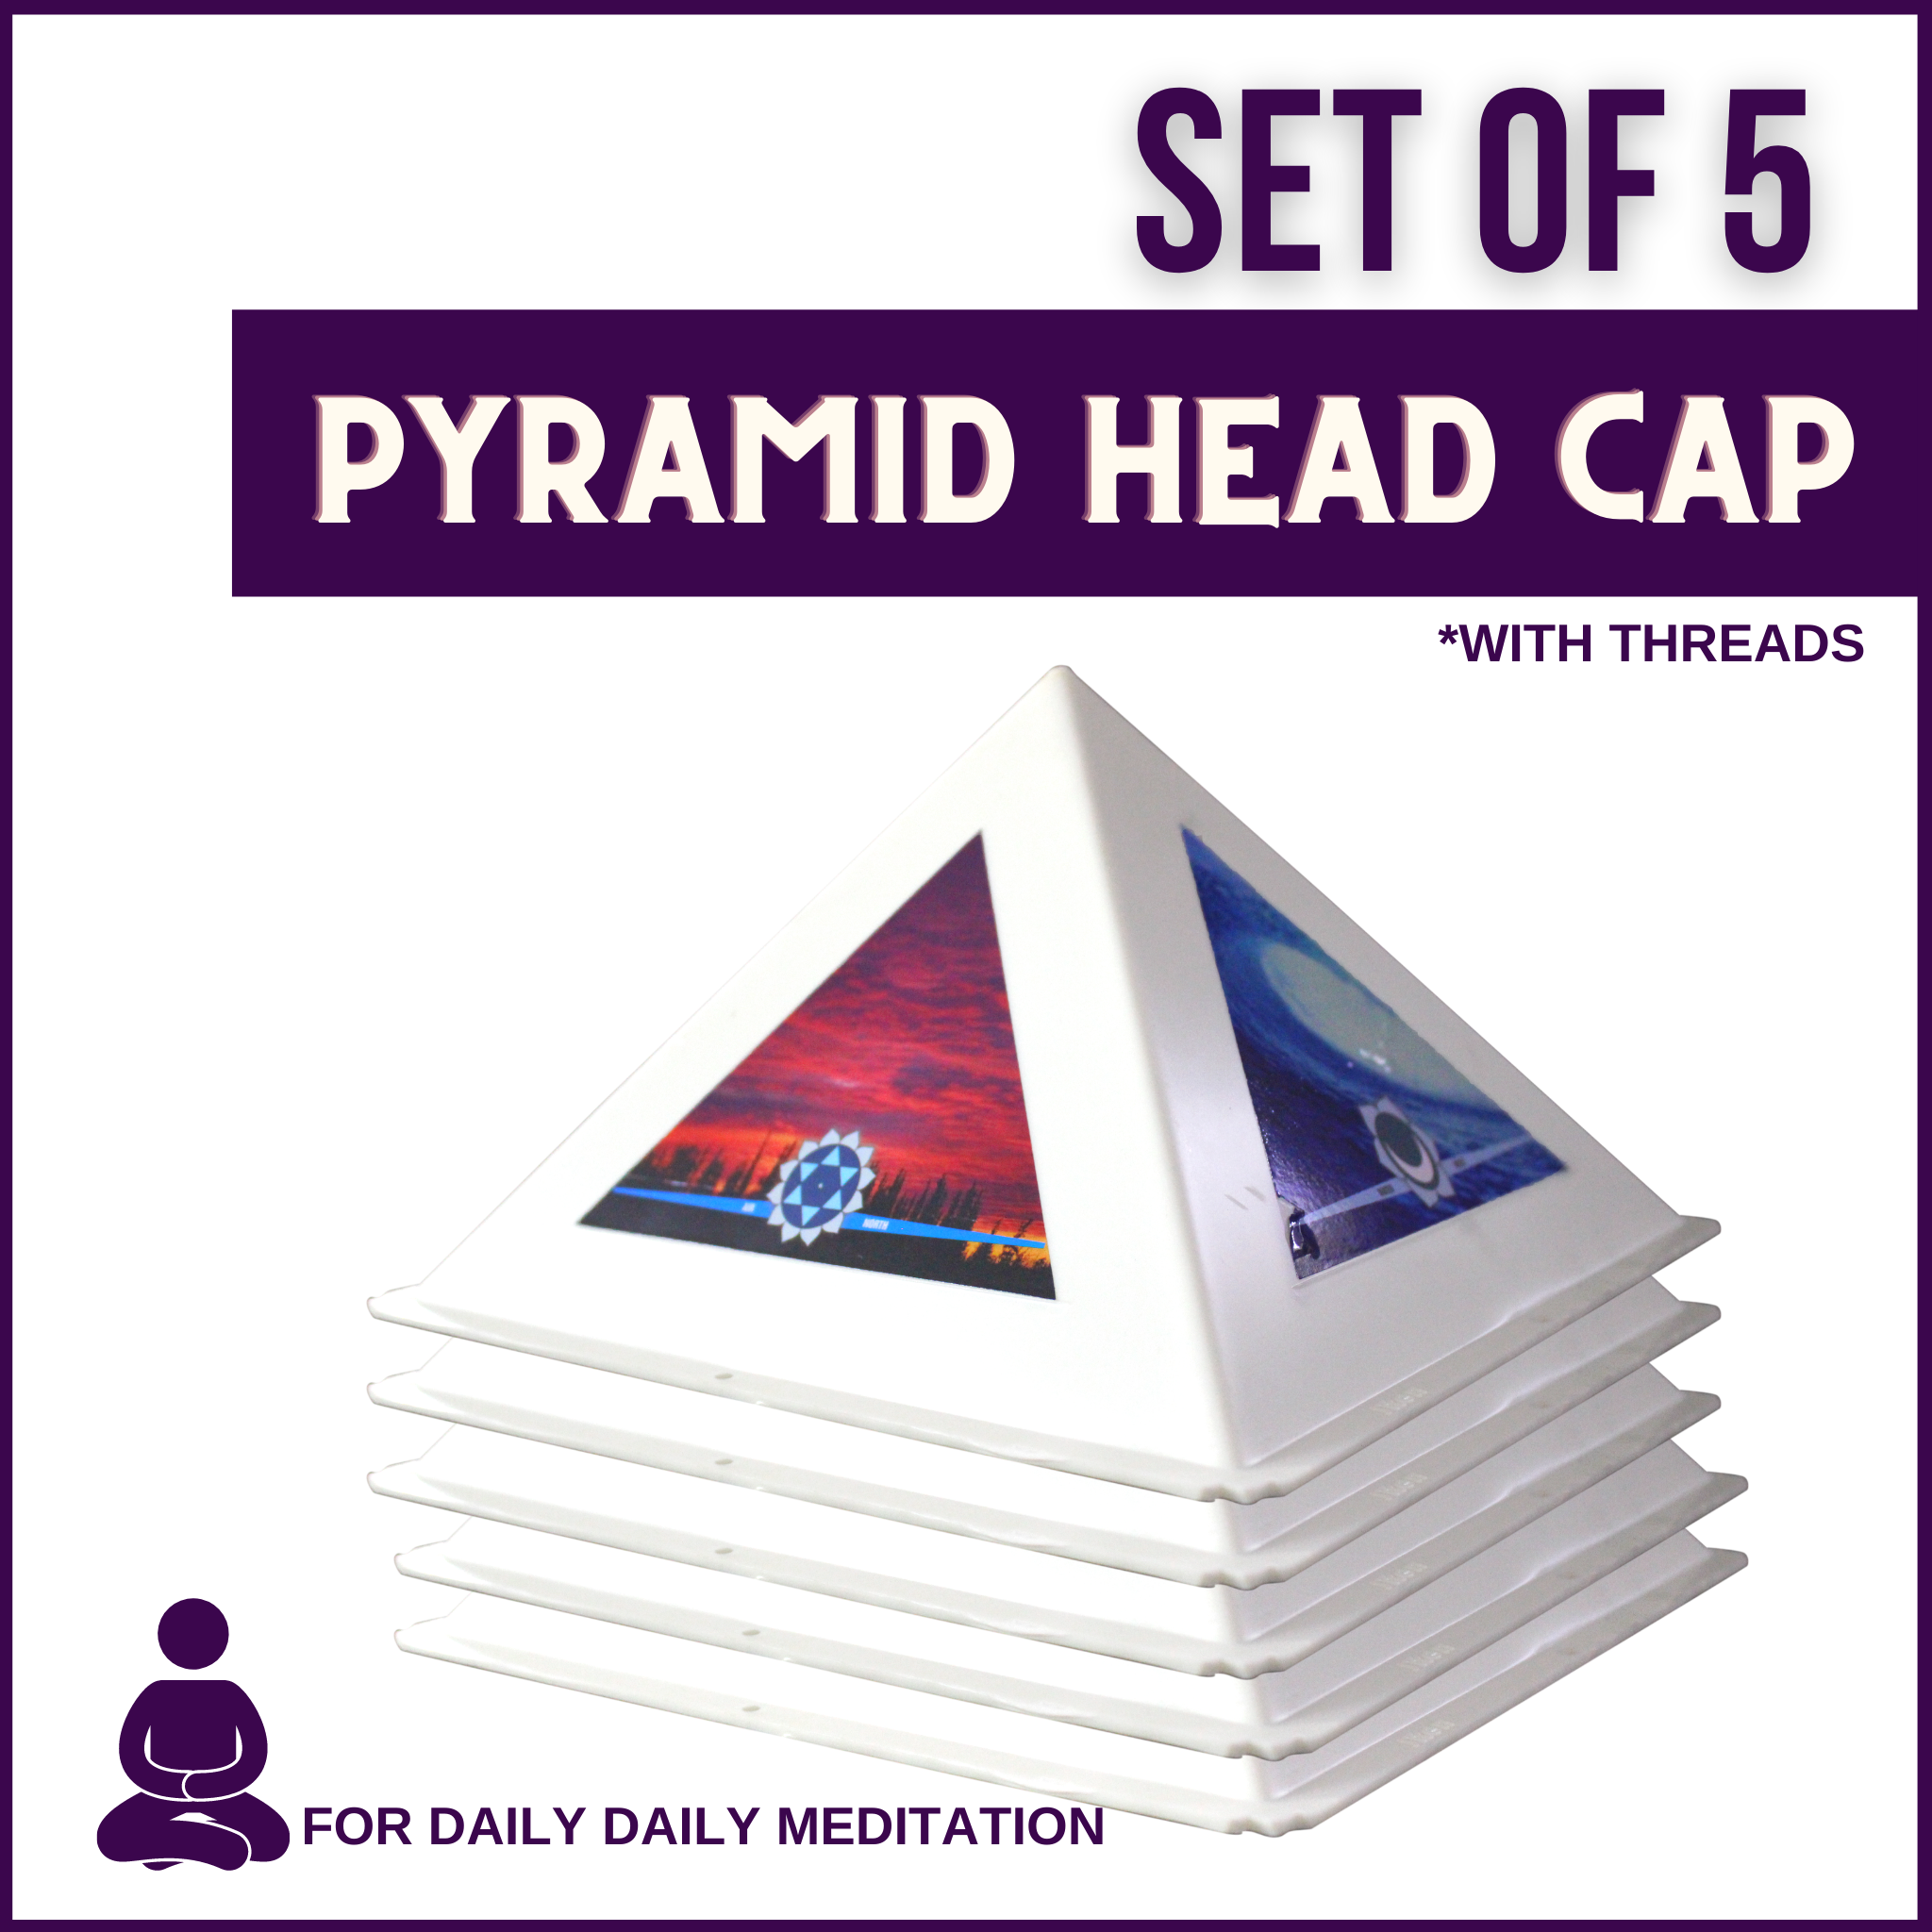 51 degree pure copper meditation pyramid is suitable for treating